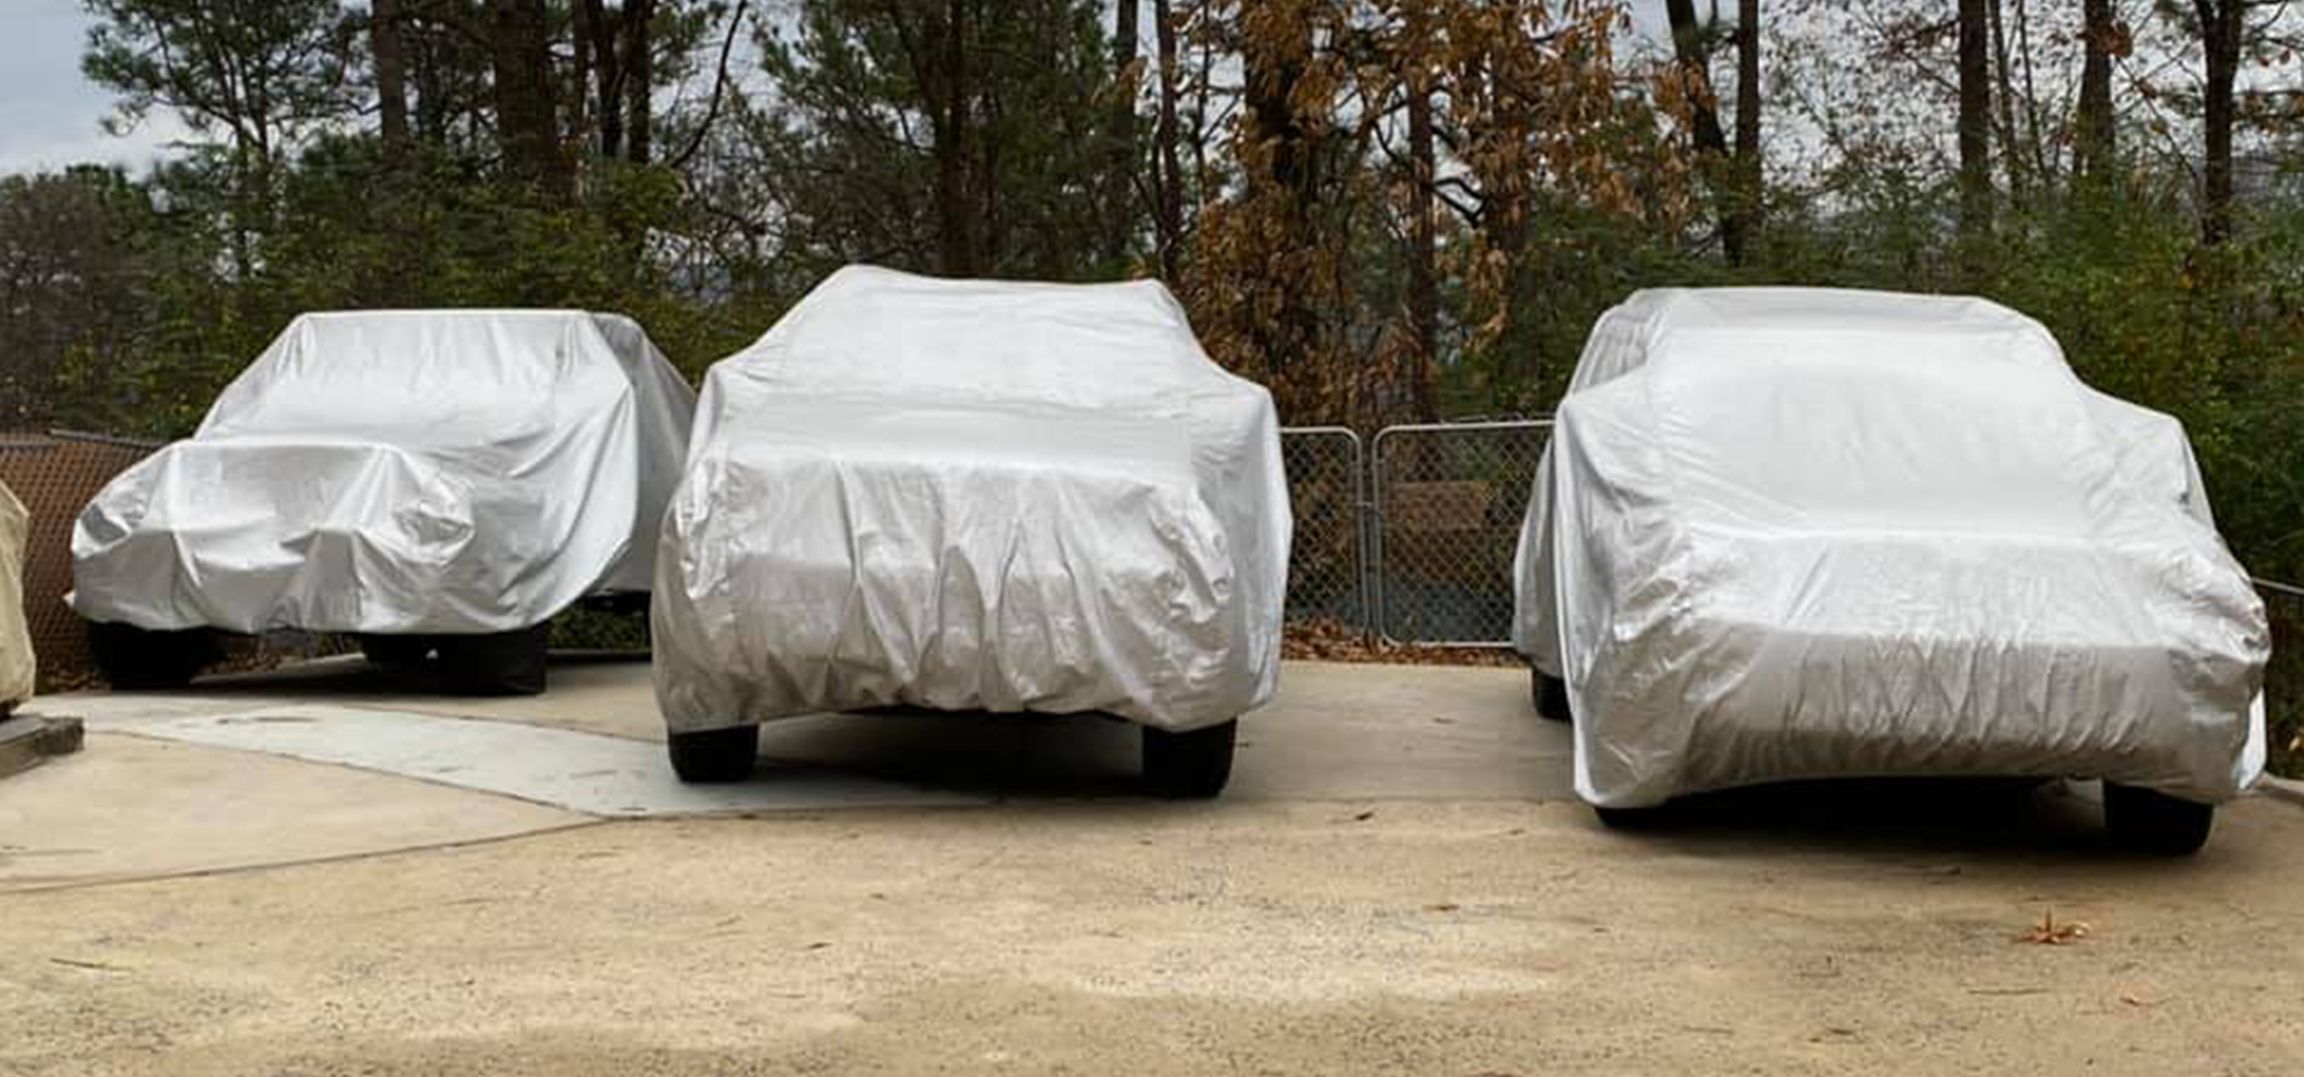 3 Vehicles Covered by Platinum Shield Covers